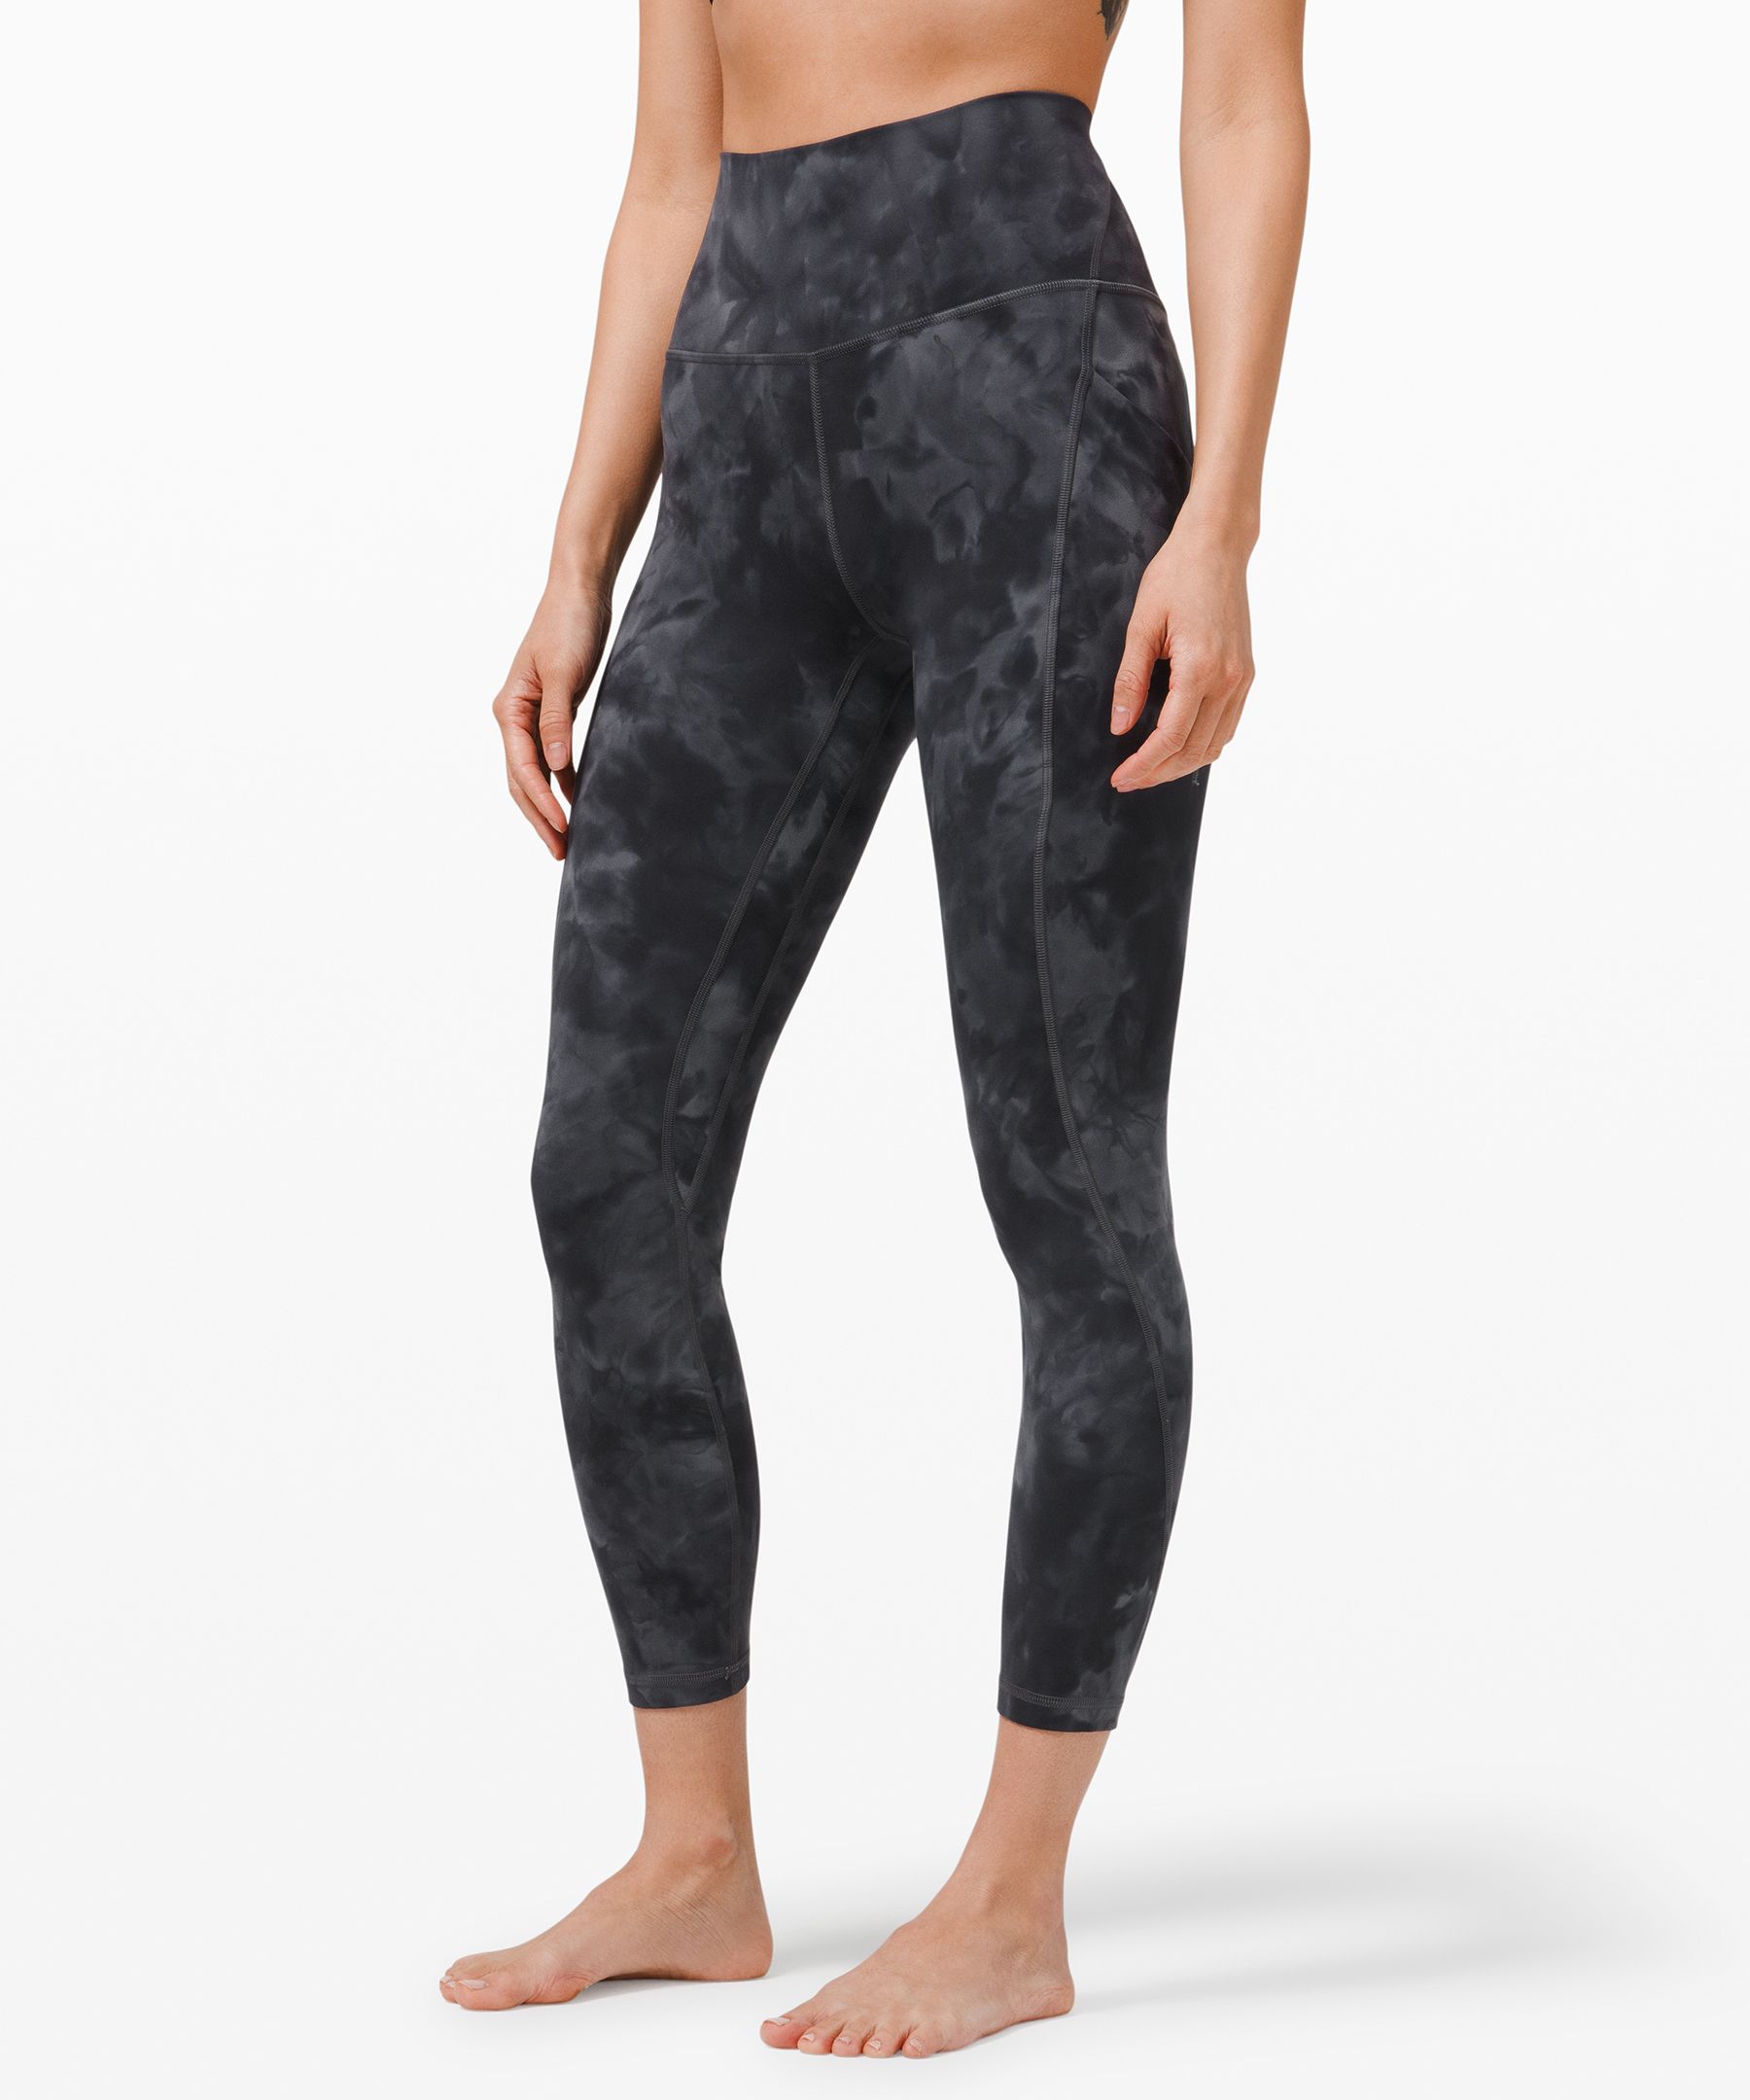 Lululemon Align High-Rise Pant 24 - Grey, Shop Today. Get it Tomorrow!